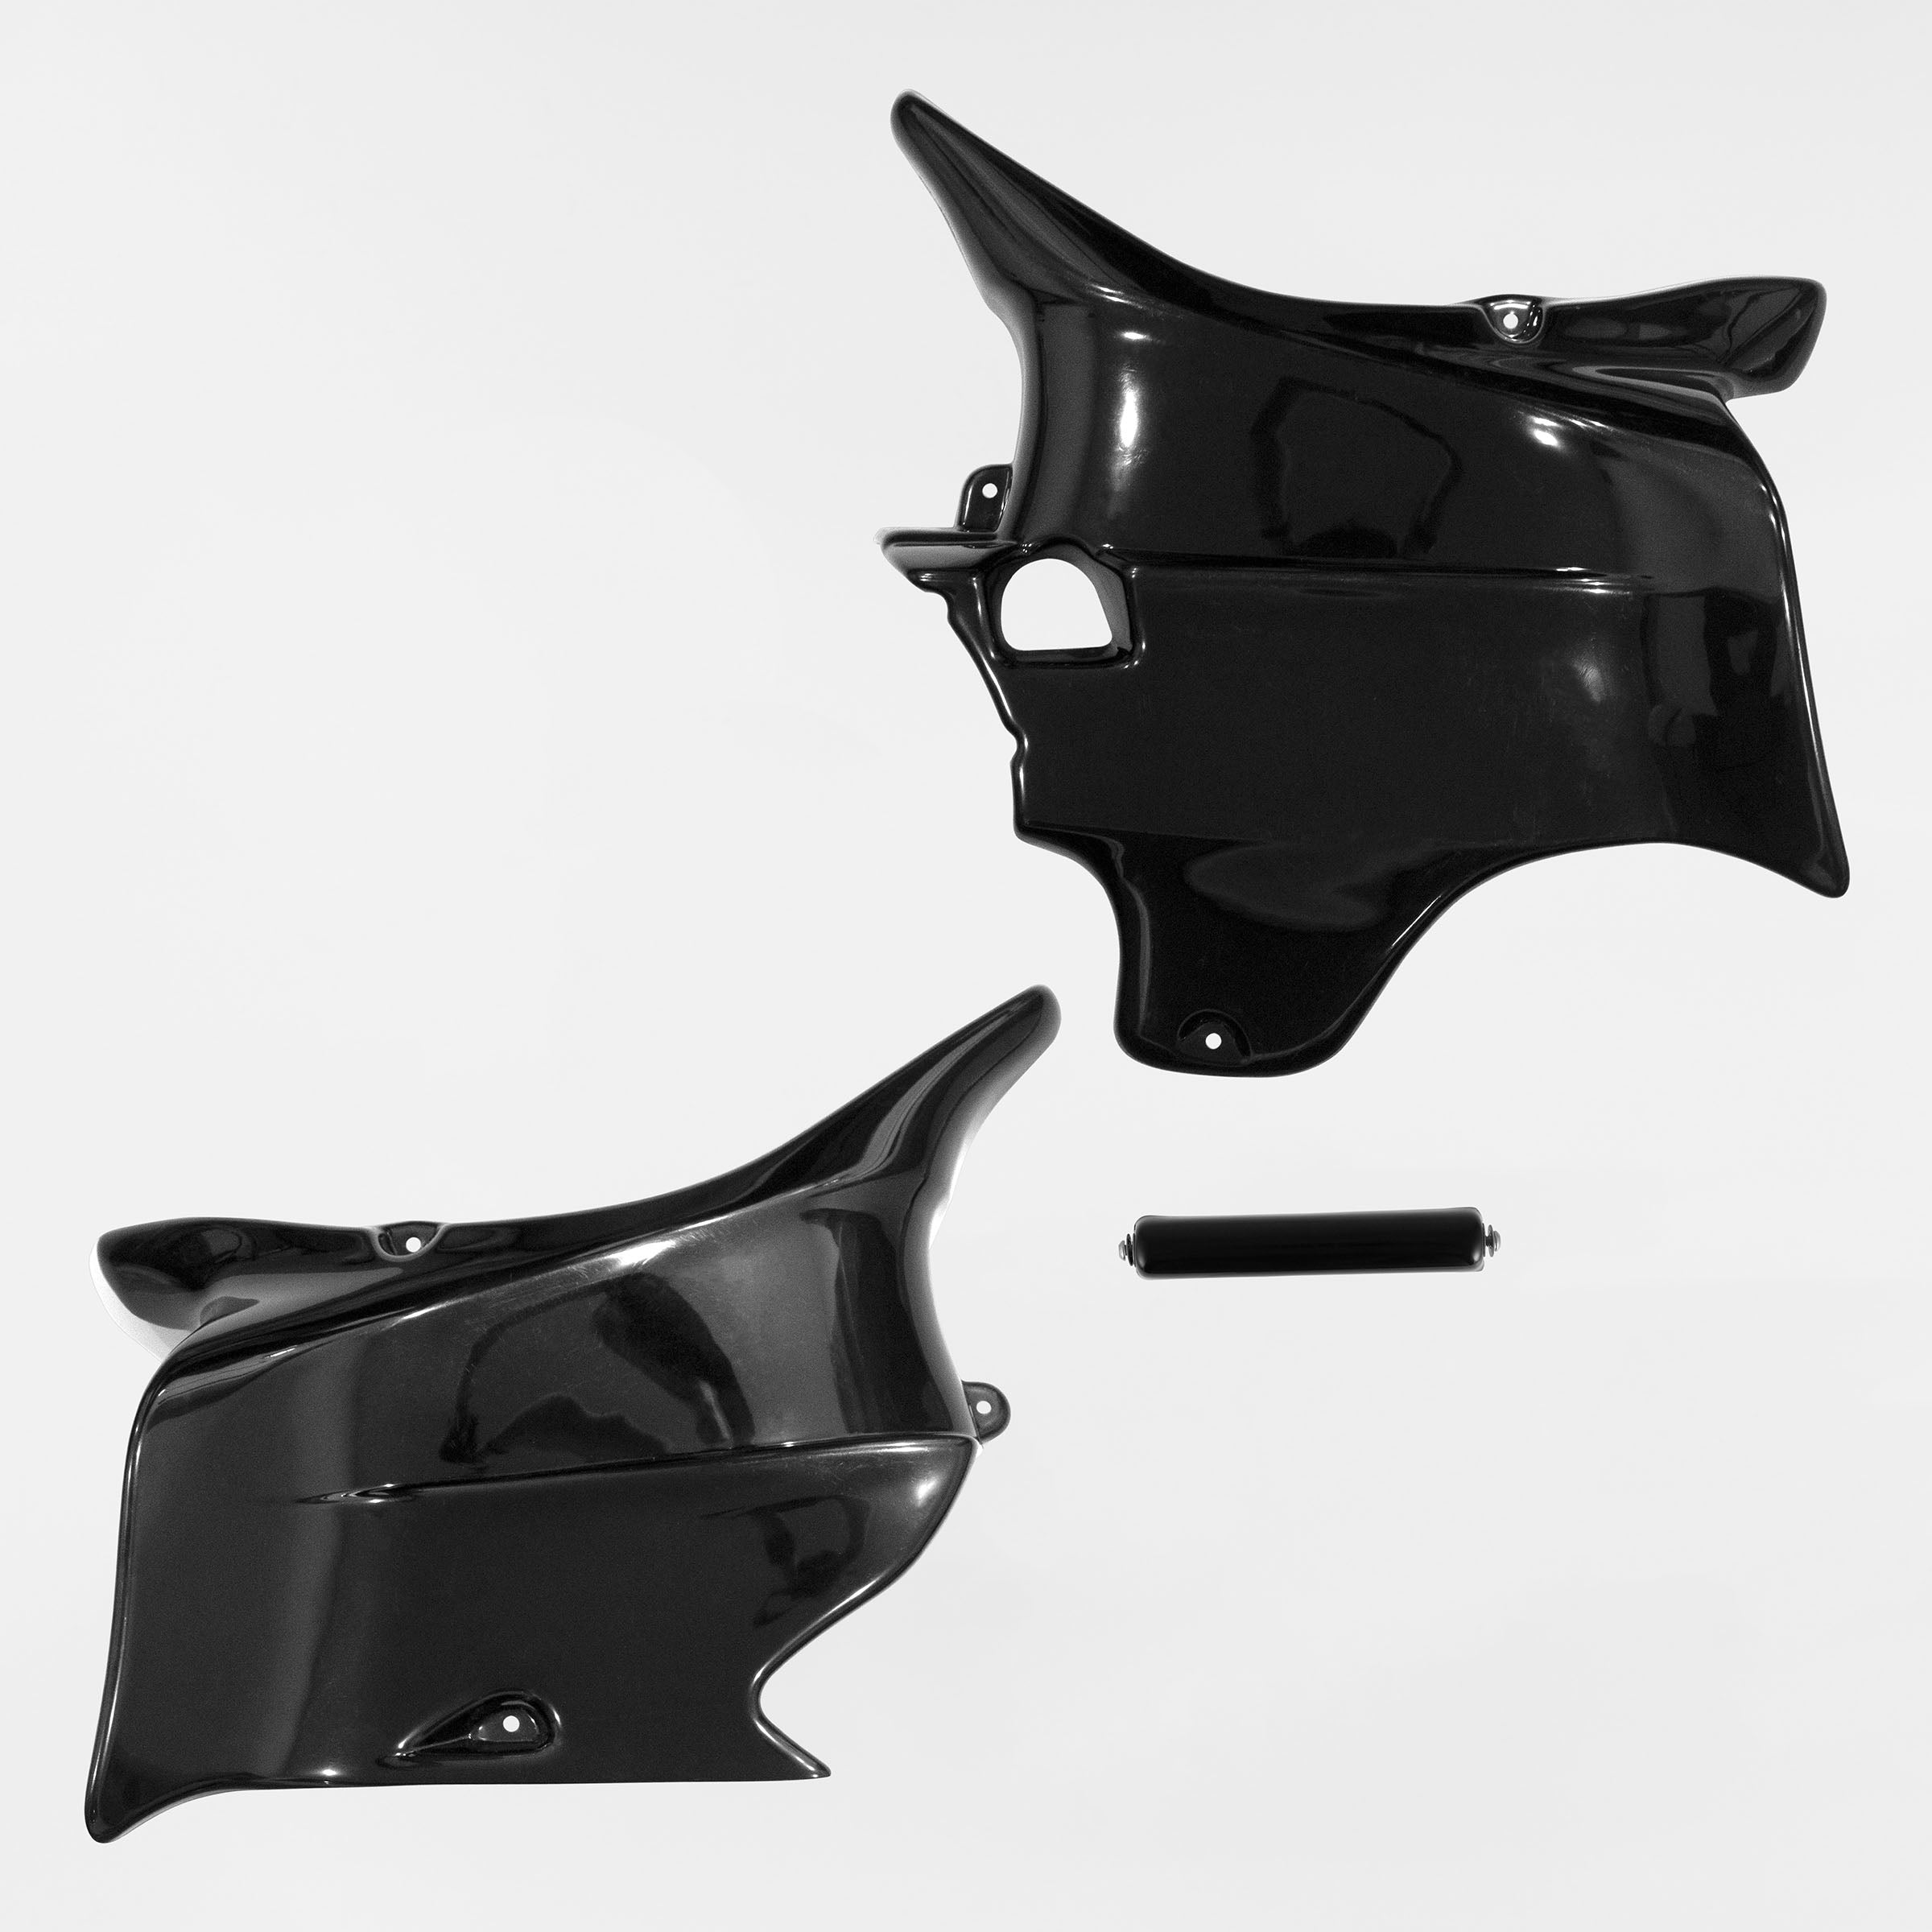 A pair of paint-ready ABS Reytelo Side Covers for Indian® 2014-2020 Chieftain Classic and Roadmaster, 2016-2018 Chieftain Limited Motorcycles(Kit includes pair of paint-ready ABS Side Covers)